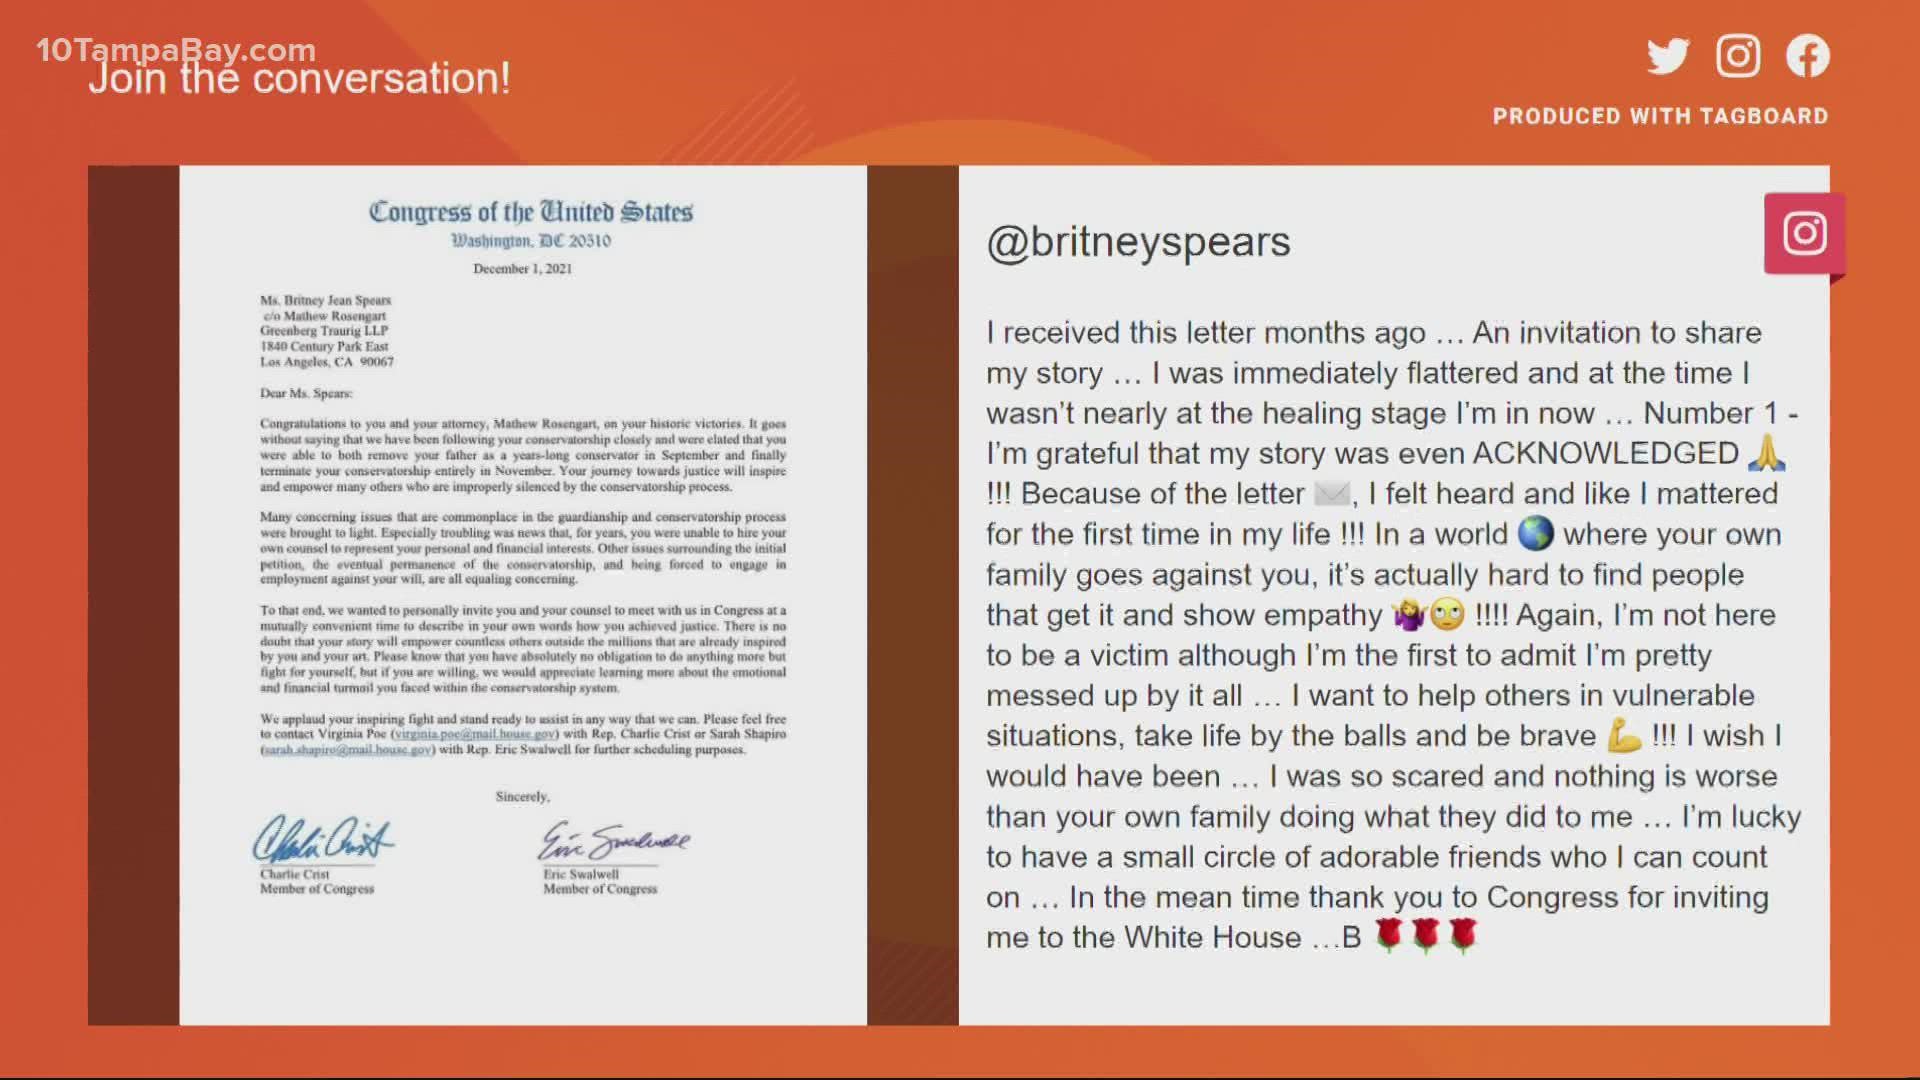 He was one of the congressmen that sent Britney Spears a letter congratulating her on the end of her conservatorship.